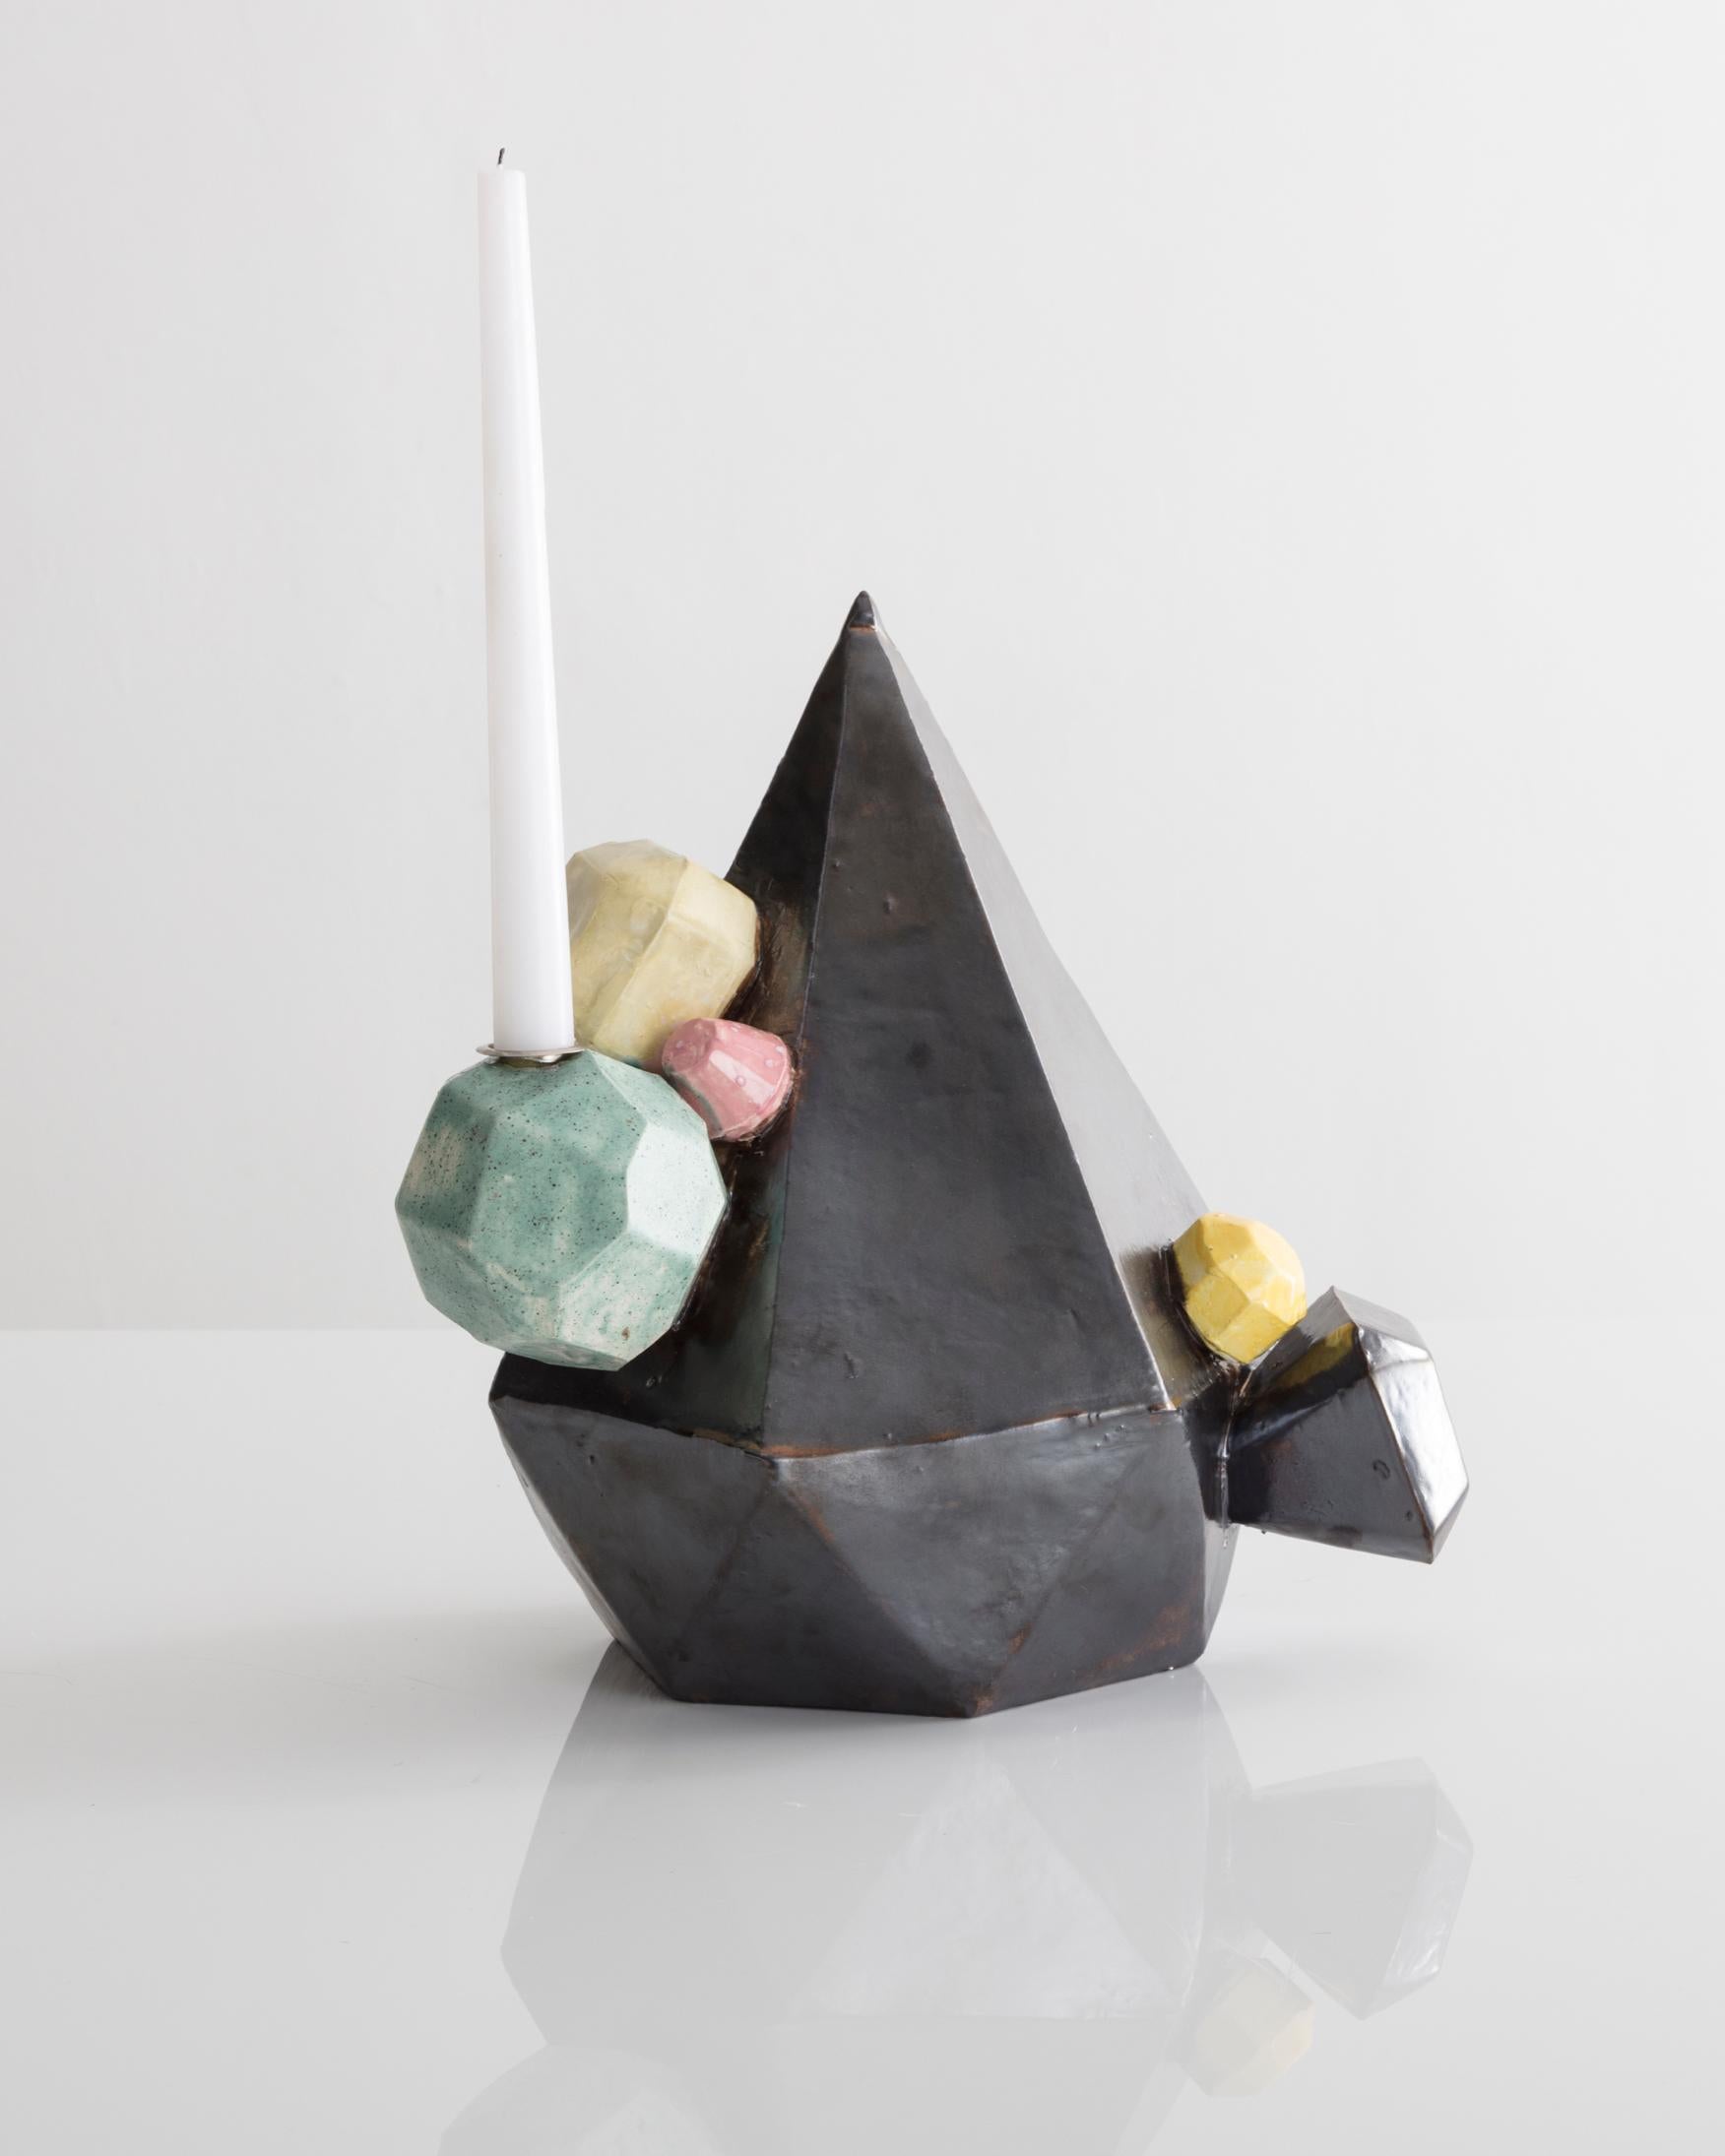 Large gem cluster, from the Cluster Series, in glazed ceramic. Designed and made by Kelly Lamb, USA, 2017.
 